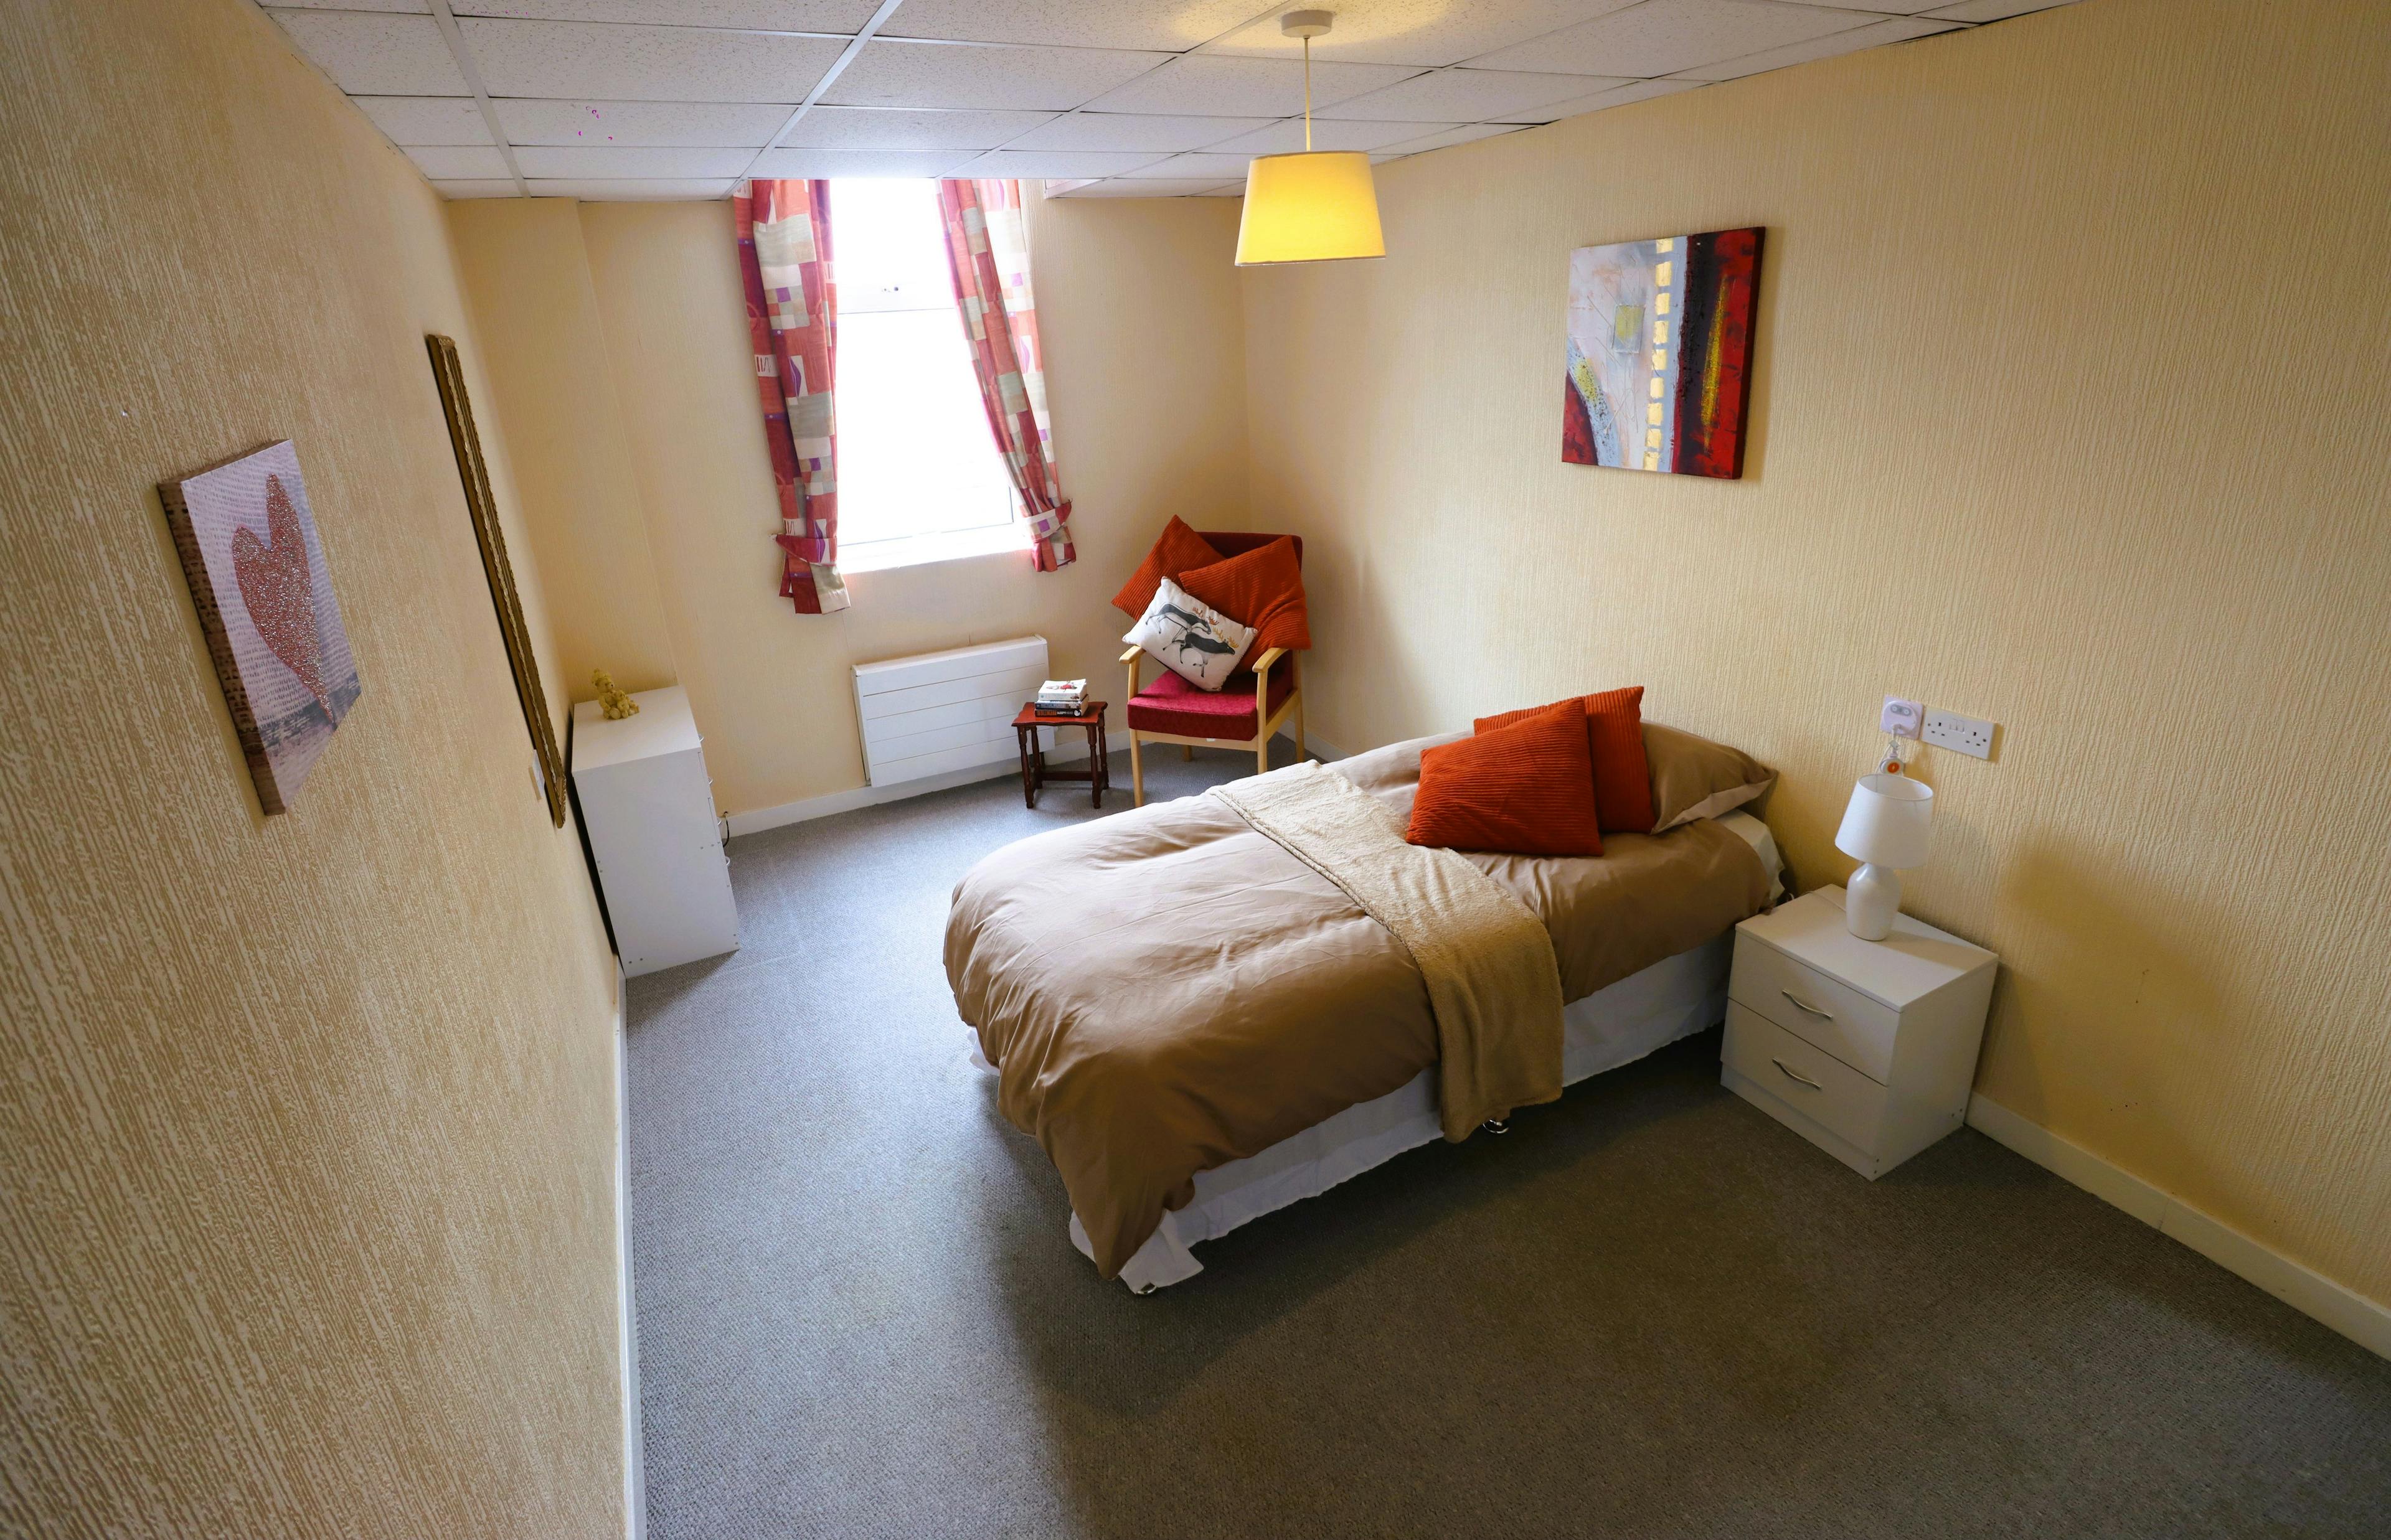 Caring & Leading - Marine Park View care home 014